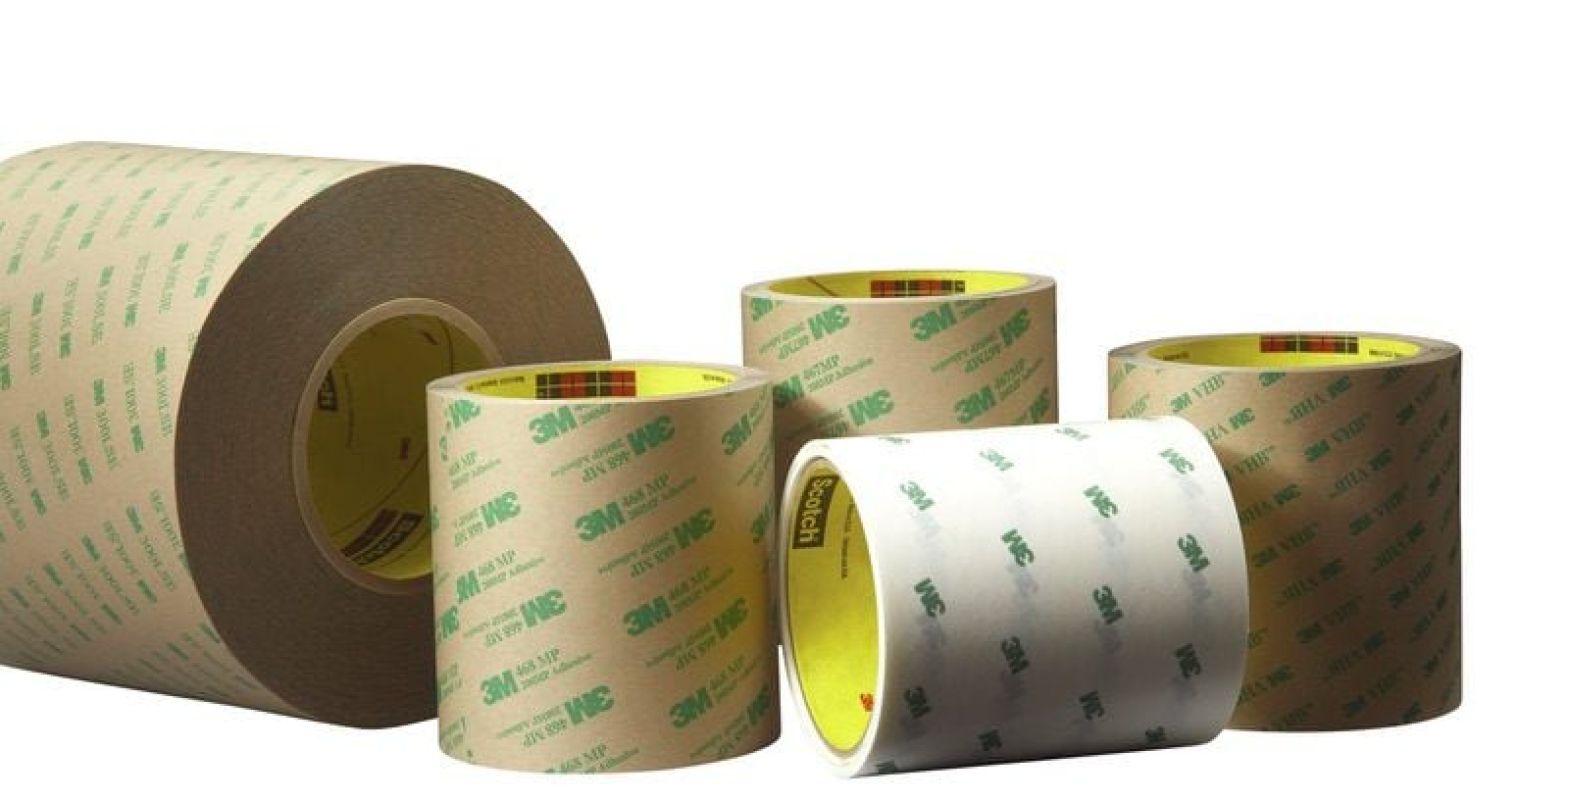 3M™ Adhesive Transfer Tape Double Linered 9553, Transparent, 670 mm x 600 m